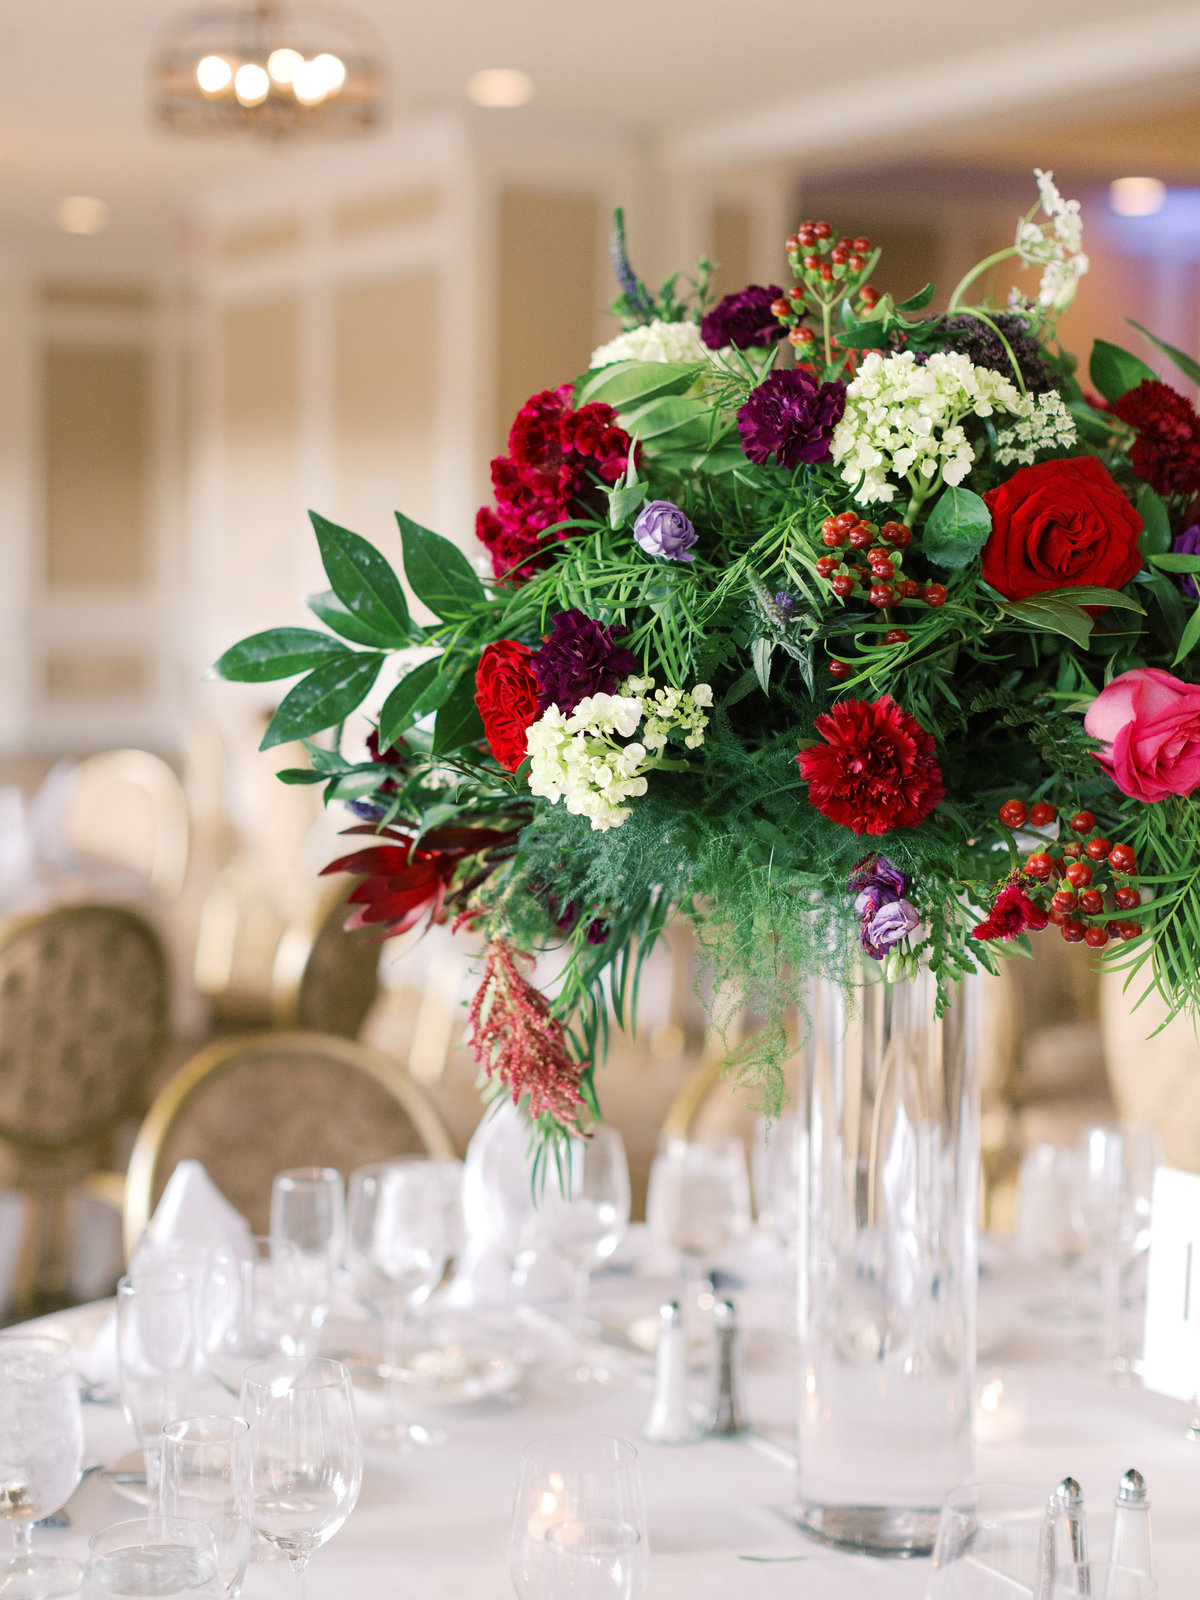 Elevated table arrangement with vivid floral colors